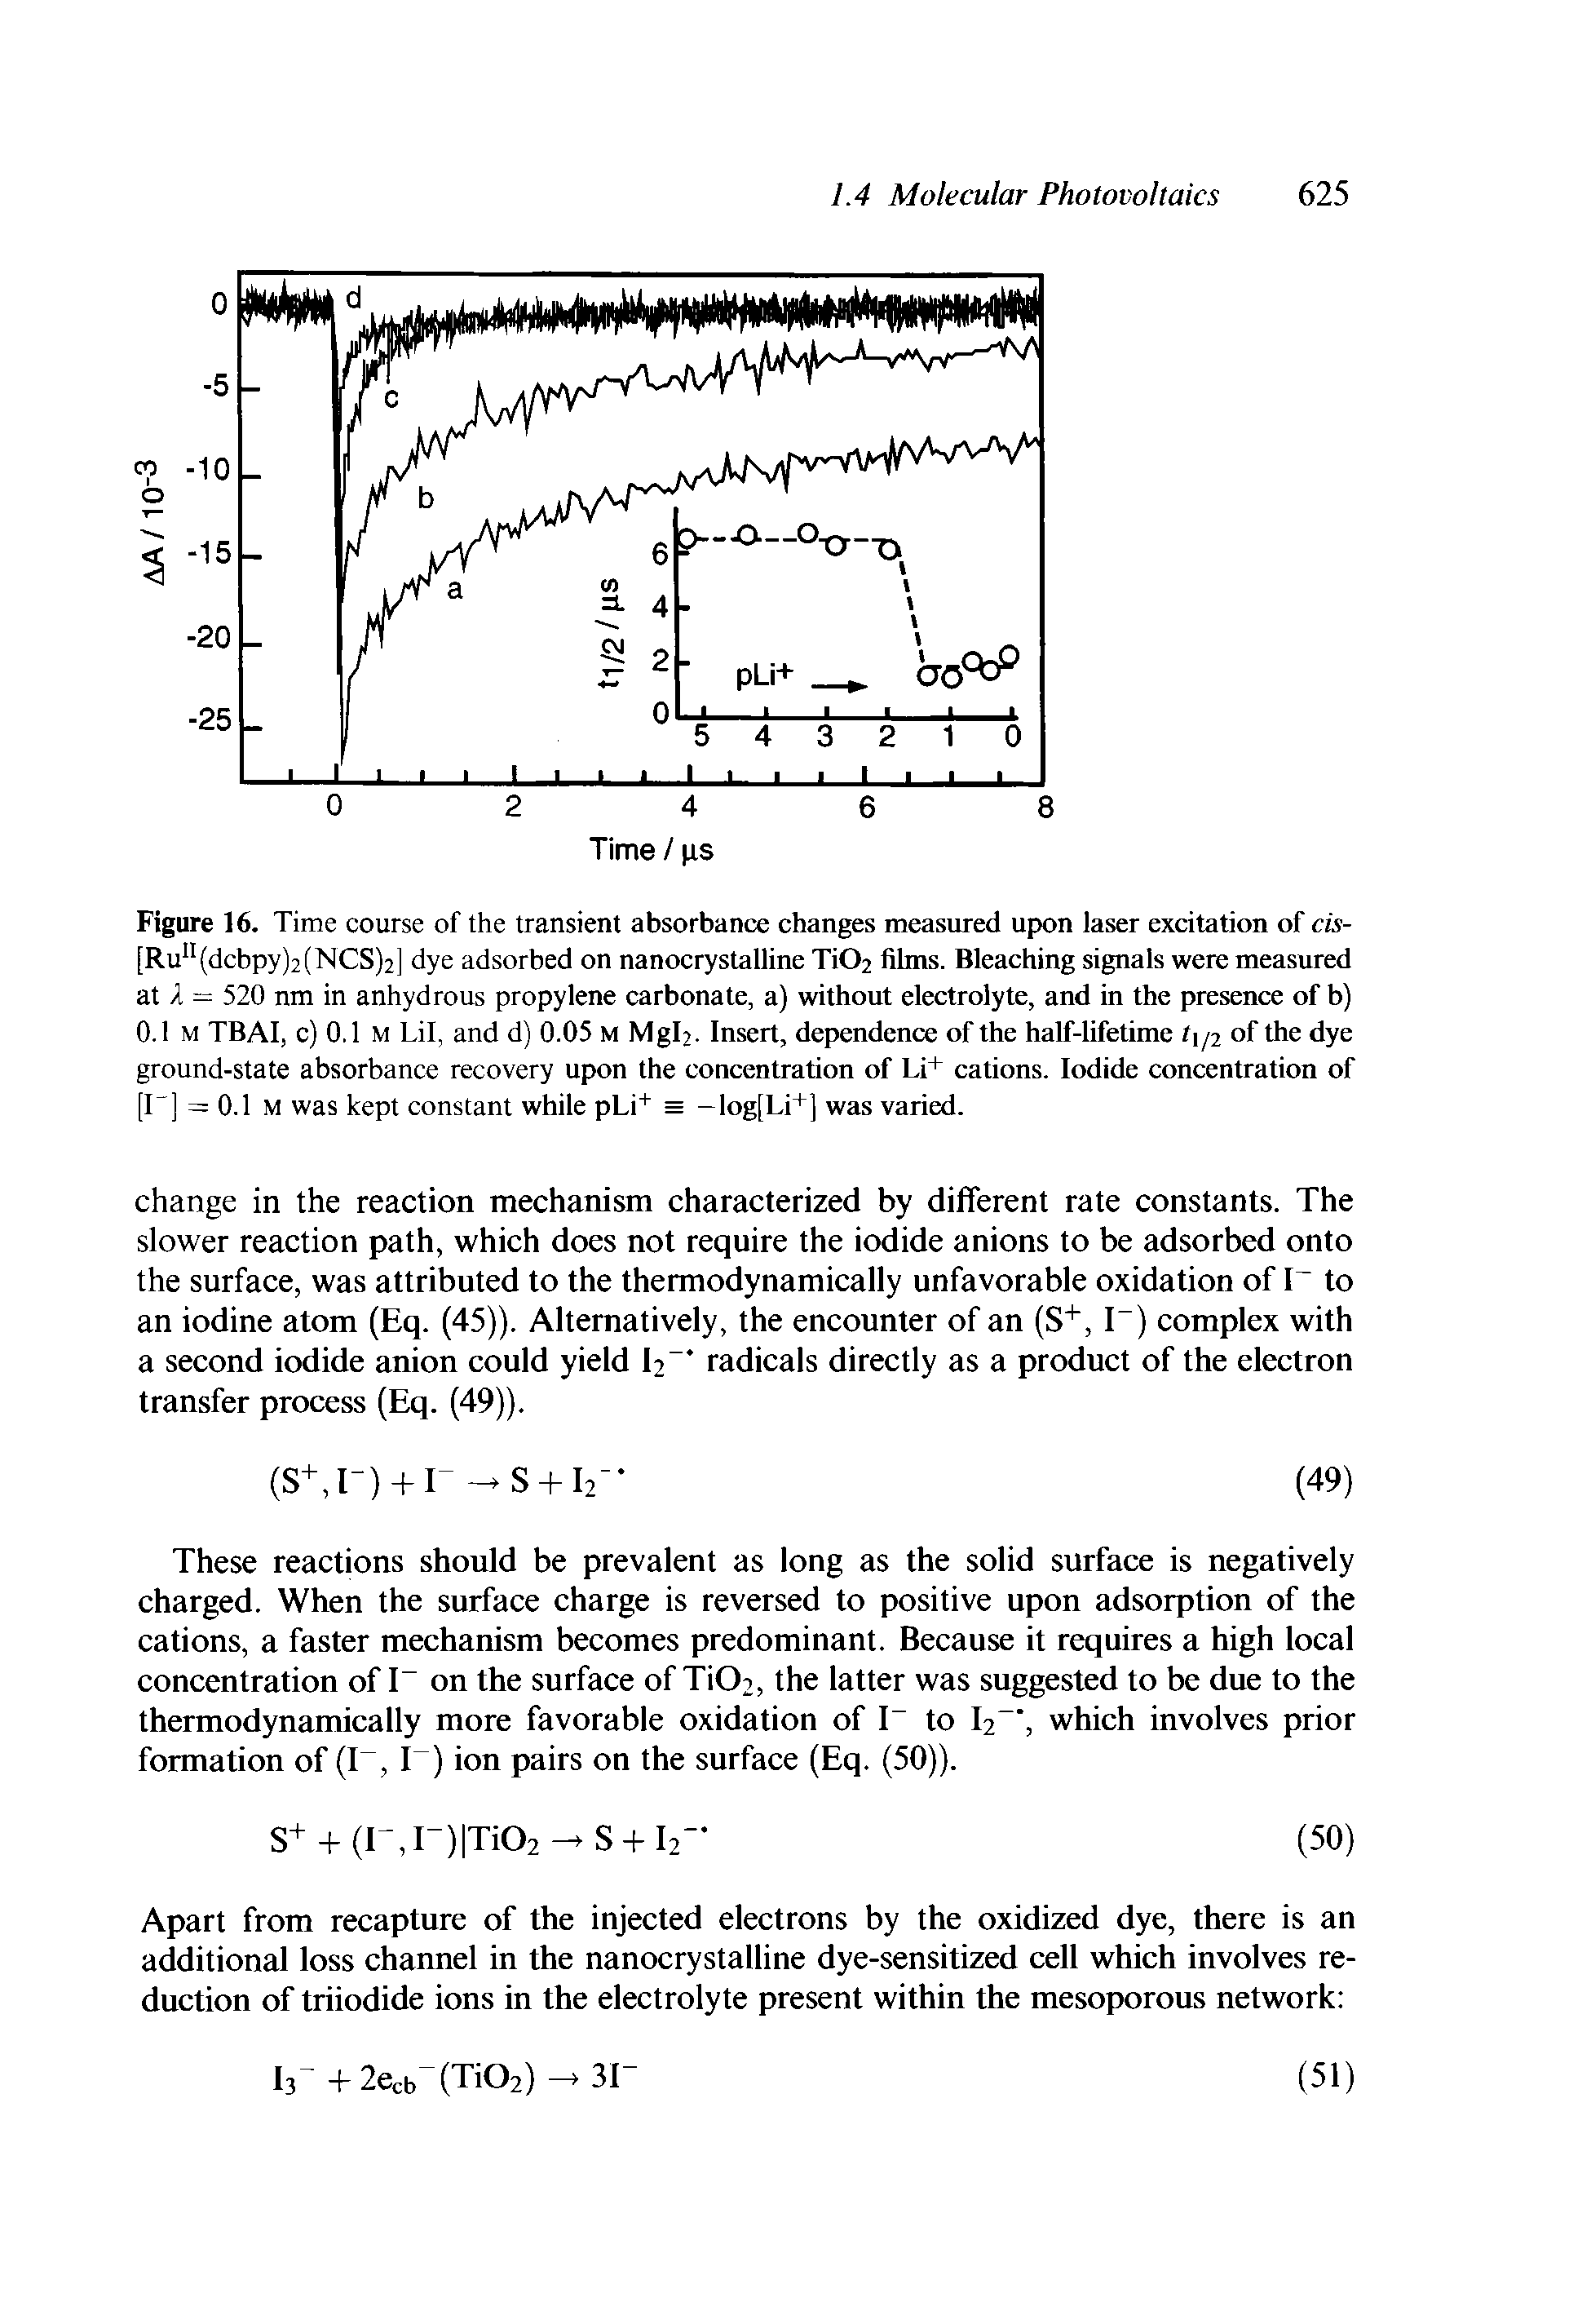 Figure 16. Time course of the transient absorbance changes measured upon laser excitation of cis-[Ru"(dcbpy)2(NCS)2] dye adsorbed on nanocrystalline Ti02 films. Bleaching signals were measured at A = 520 nm in anhydrous propylene carbonate, a) without electrolyte, and in the presence of b) 0.1 M TBAI, c) 0.1 M Lil, and d) 0.05 m Mgl2. Insert, dependence of the half-lifetime t /2 of the dye ground-state absorbance recovery upon the concentration of Li+ cations. Iodide concentration of [I ] = 0.1 M was kept constant while pLi = -log[Li+] was varied.